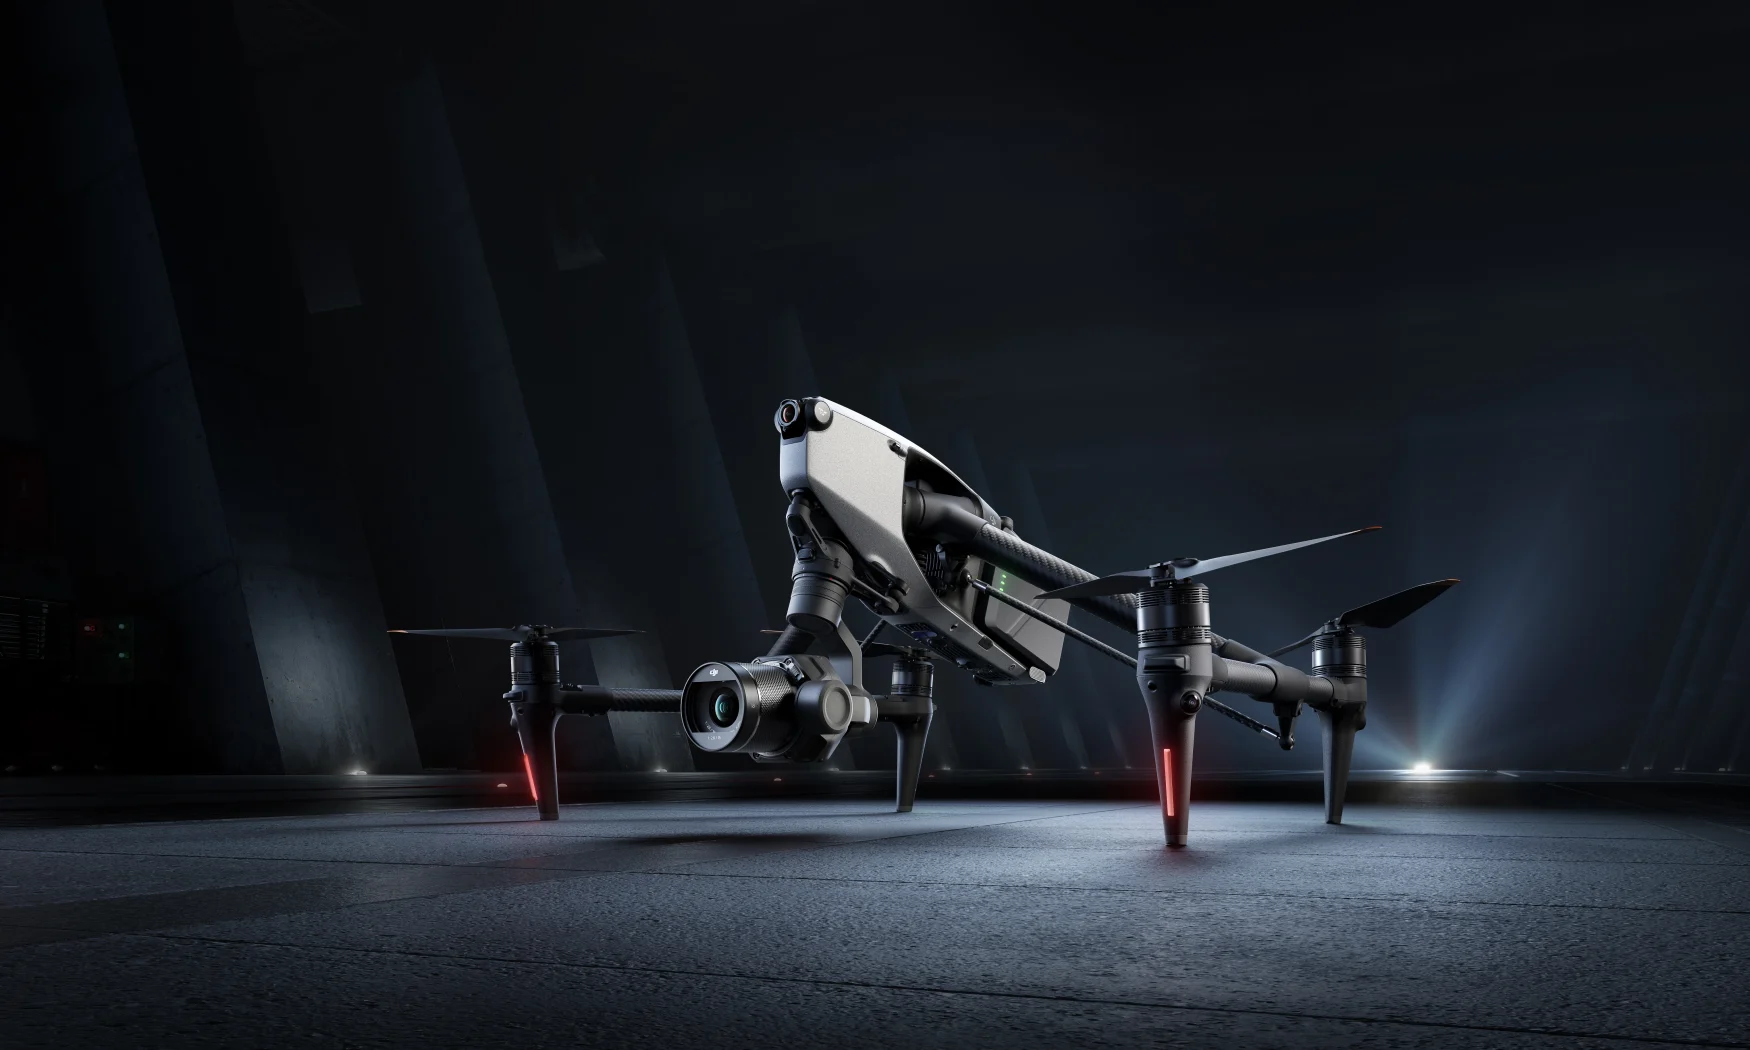 Marketing photo of the DJI Inspire 3 drone, sitting in dramatic lighting on a gray surface.